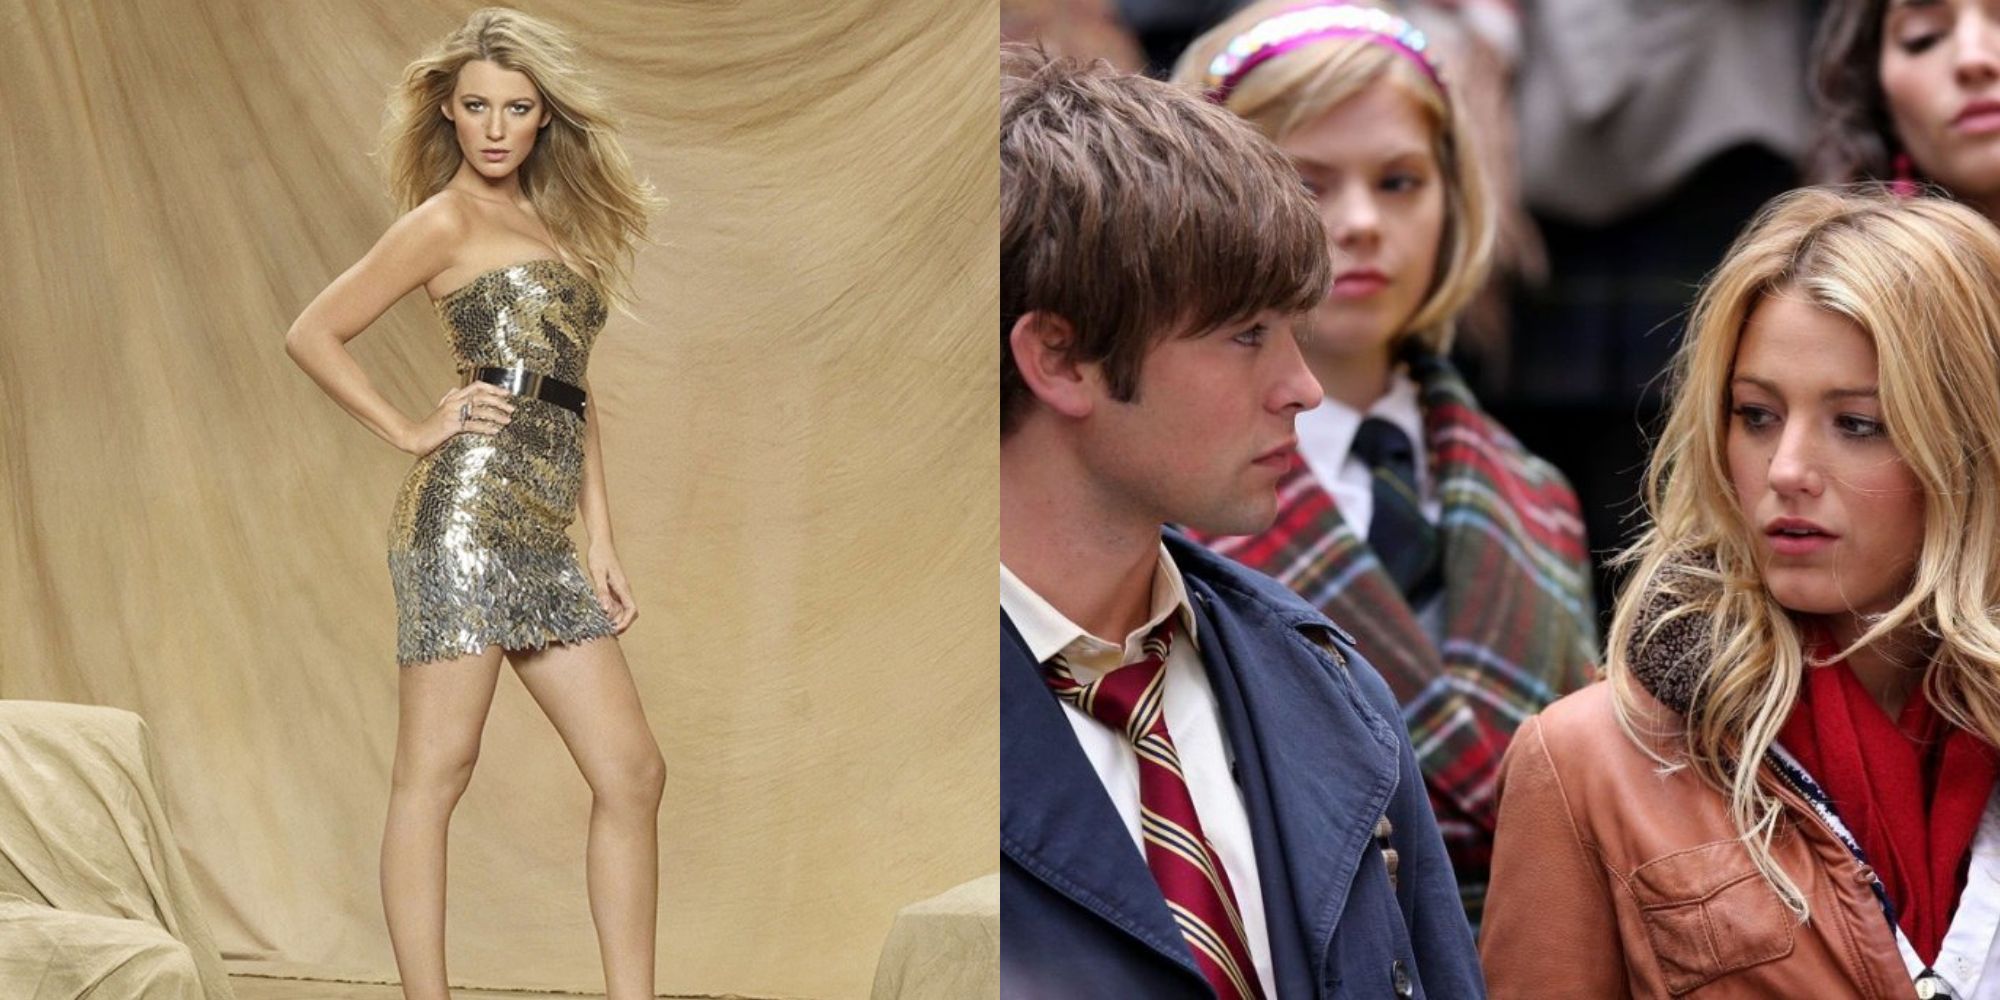 Gossip Girl: 10 Differences Between Serena In The Books & The TV Show